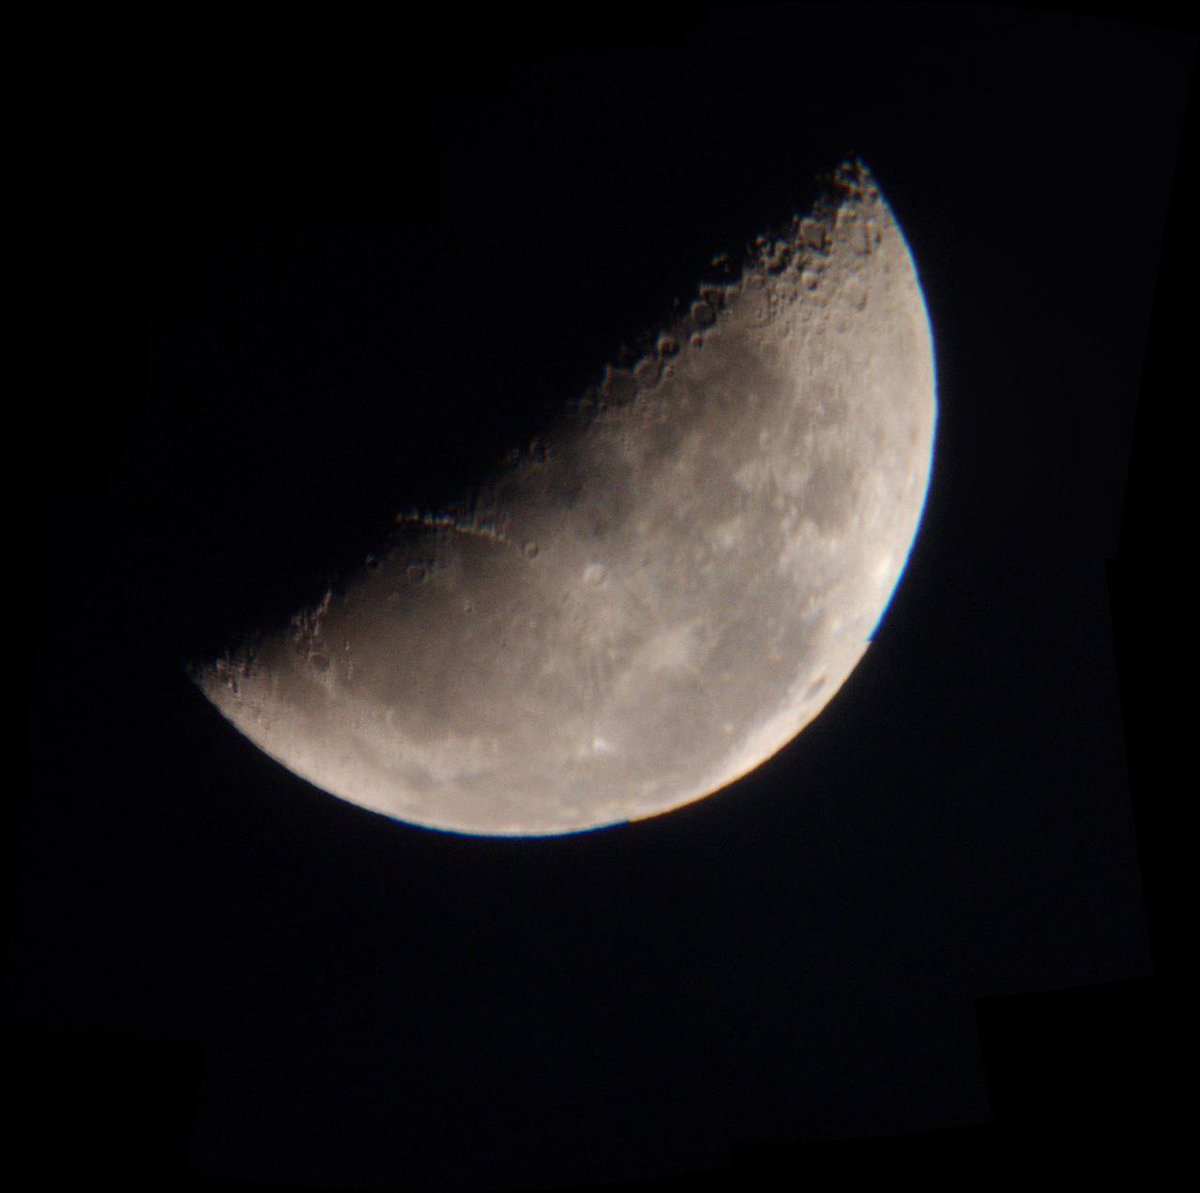 76 .08 MP image of #moon clicked using 12MP camera smartphone #redmi7A by our member Astro Dude. #mobilephotography #astronomy #Astrophotography #smartphone_astrophotography #half_moon #Moonshot #MoonHour @the_ita_moon